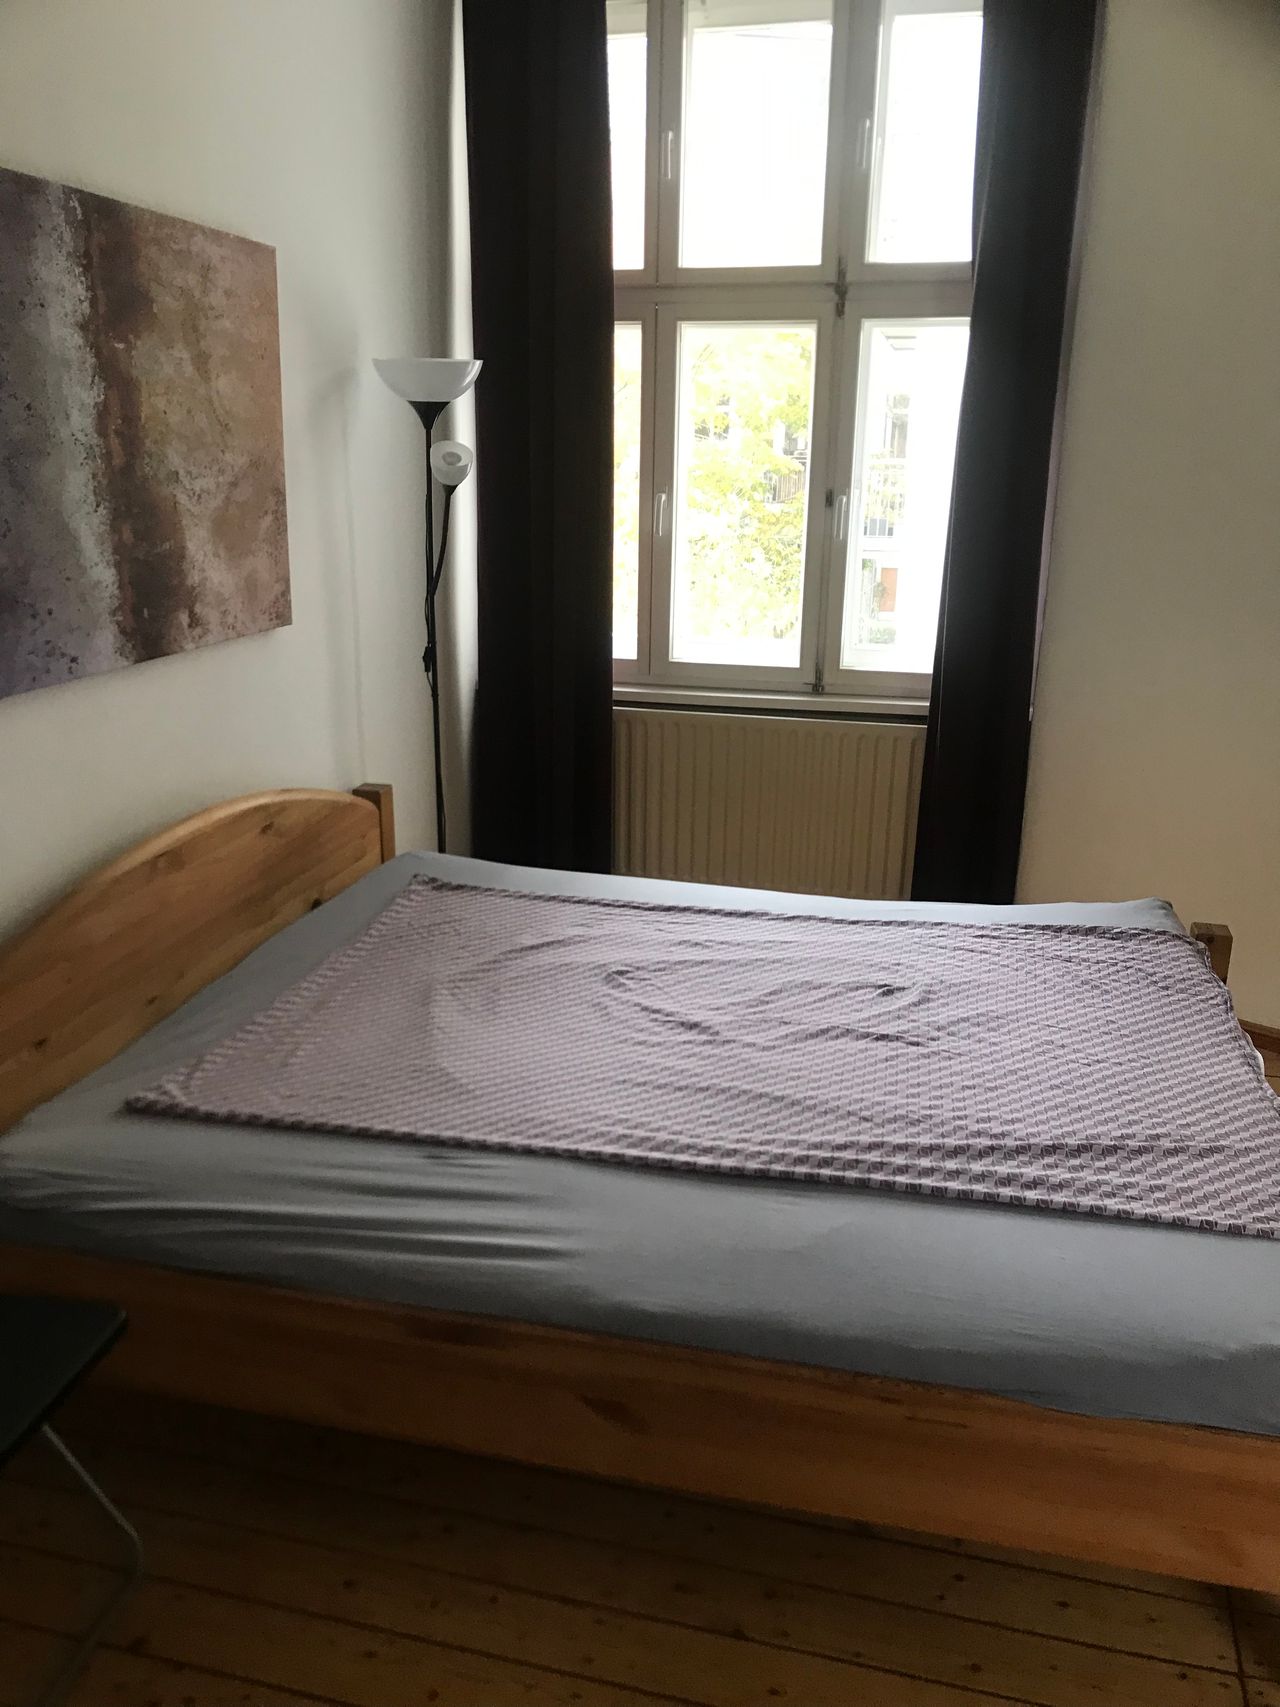 Central, sunny and gorgeous studio located in Friedrichshain